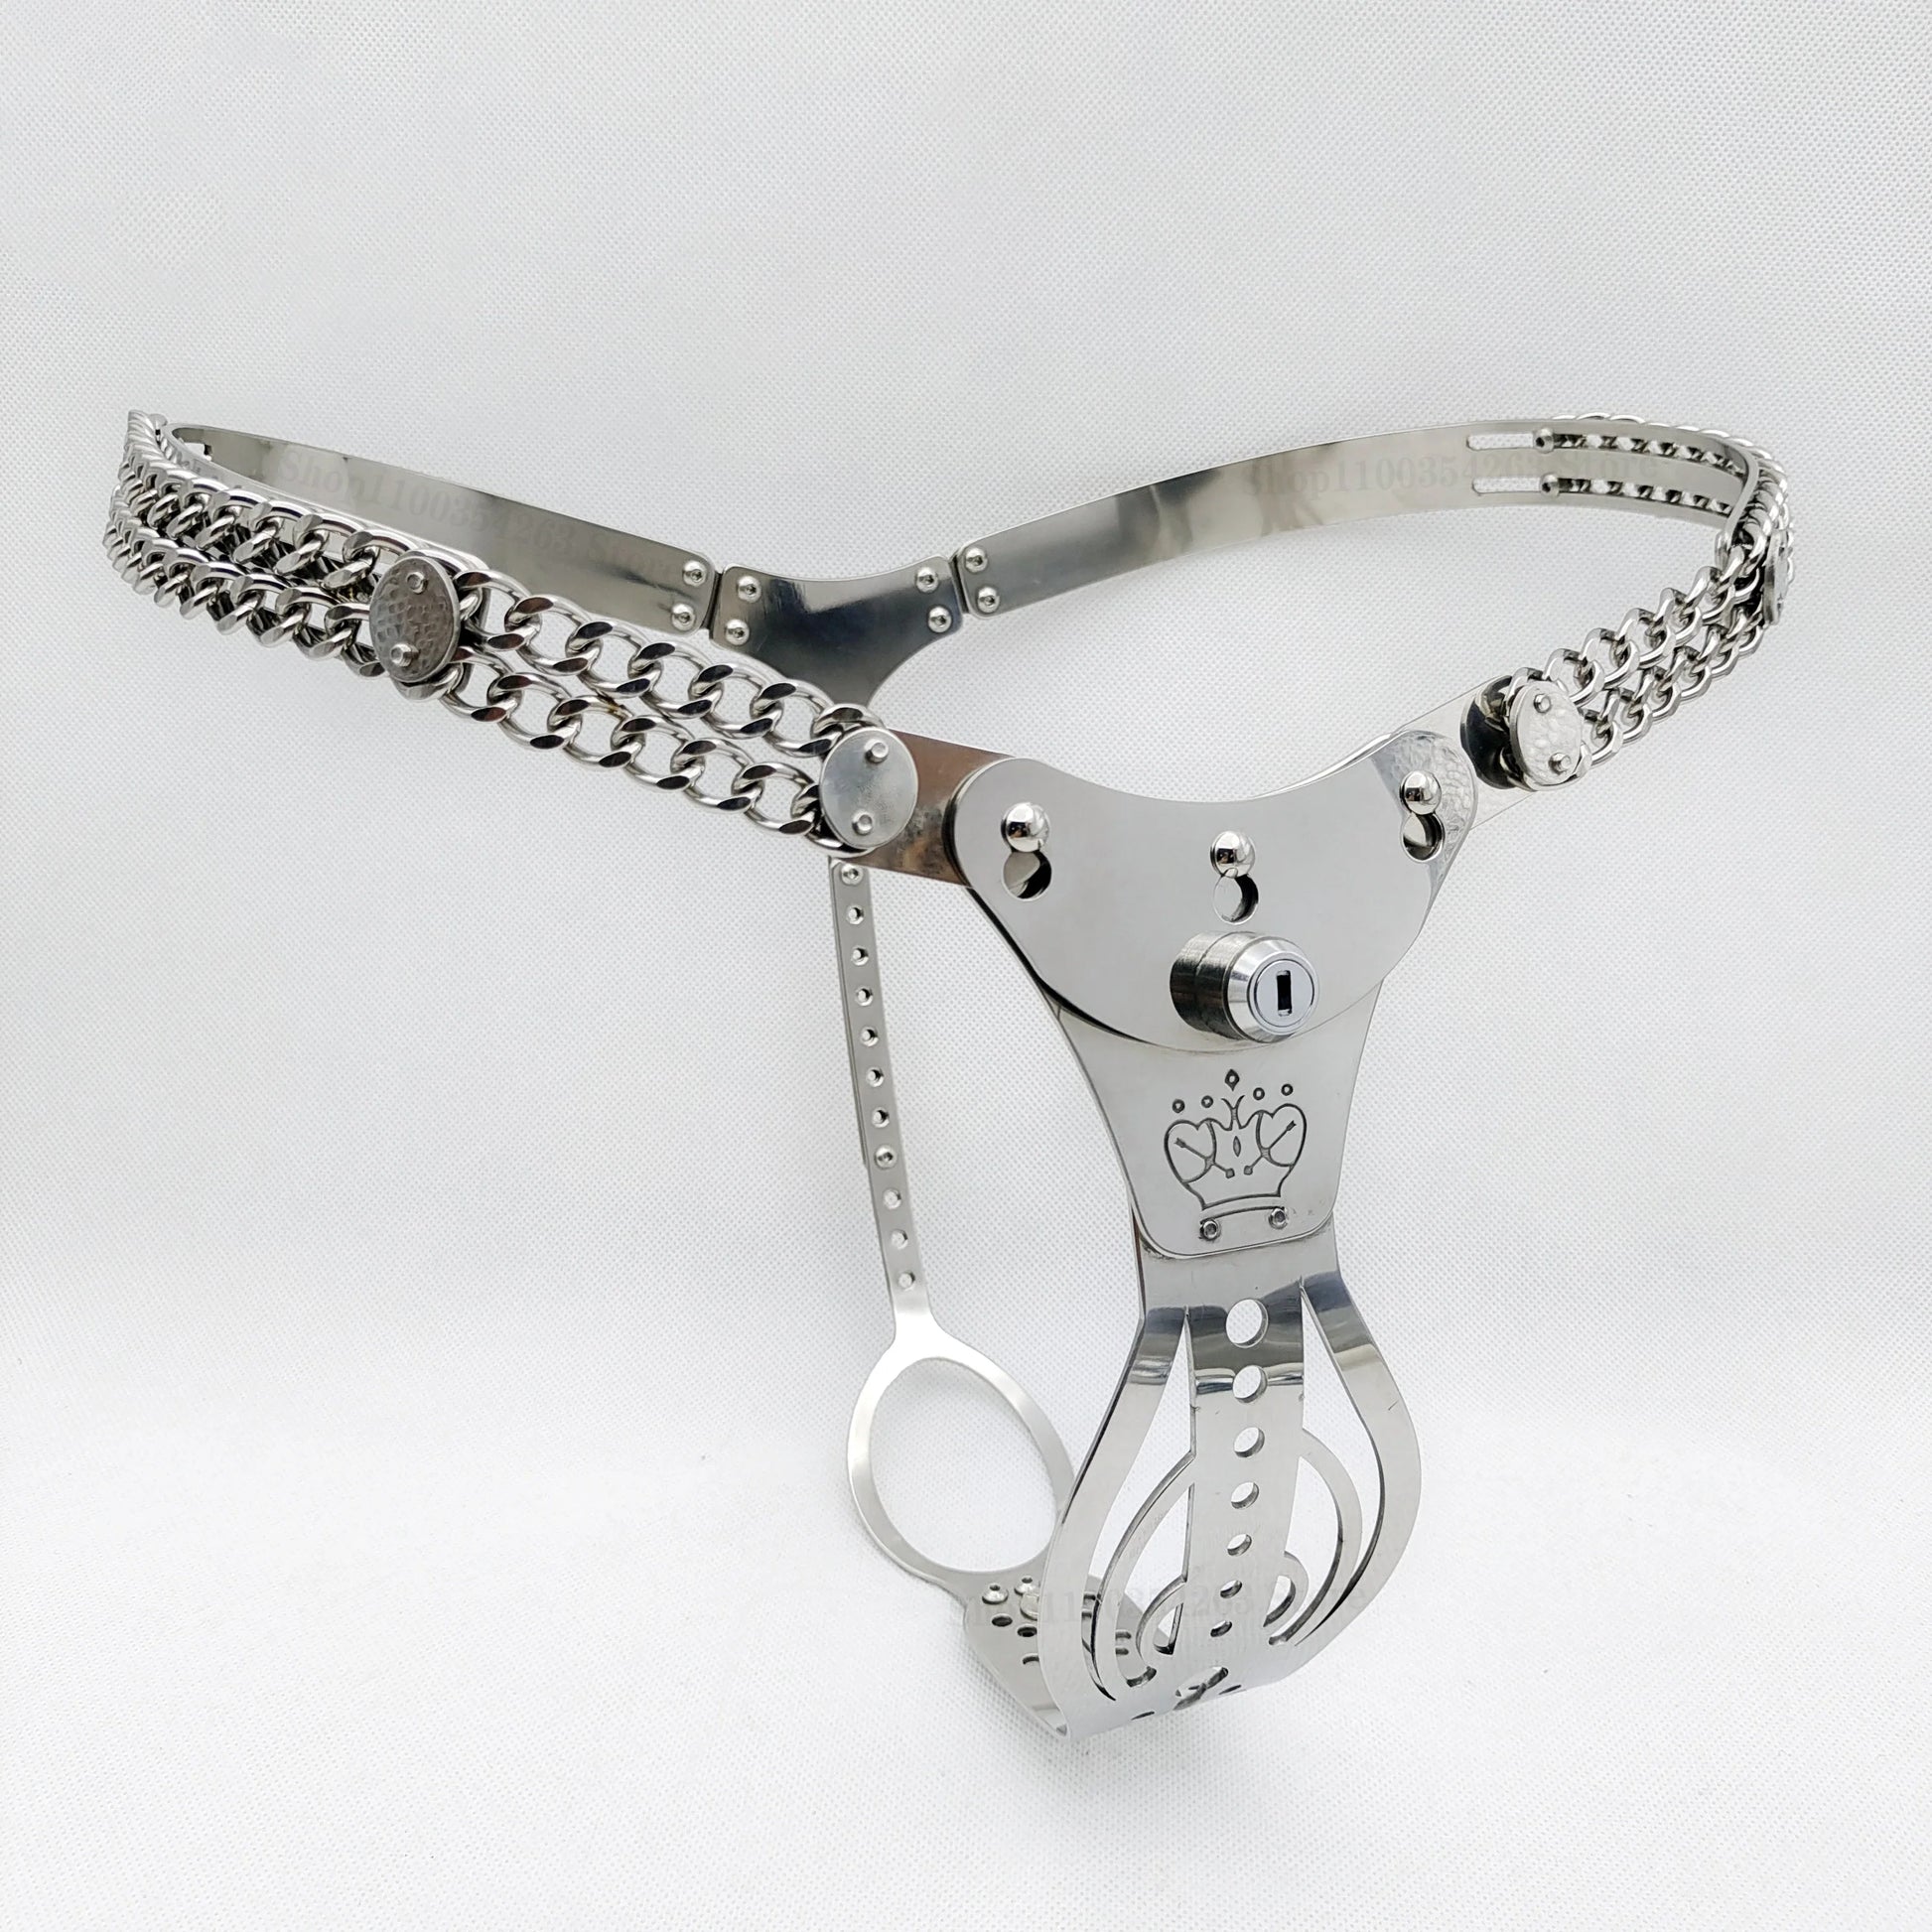 Metal Chastity Belt For Women with Removable Viginal and Anal Plugs - KeepMeLocked